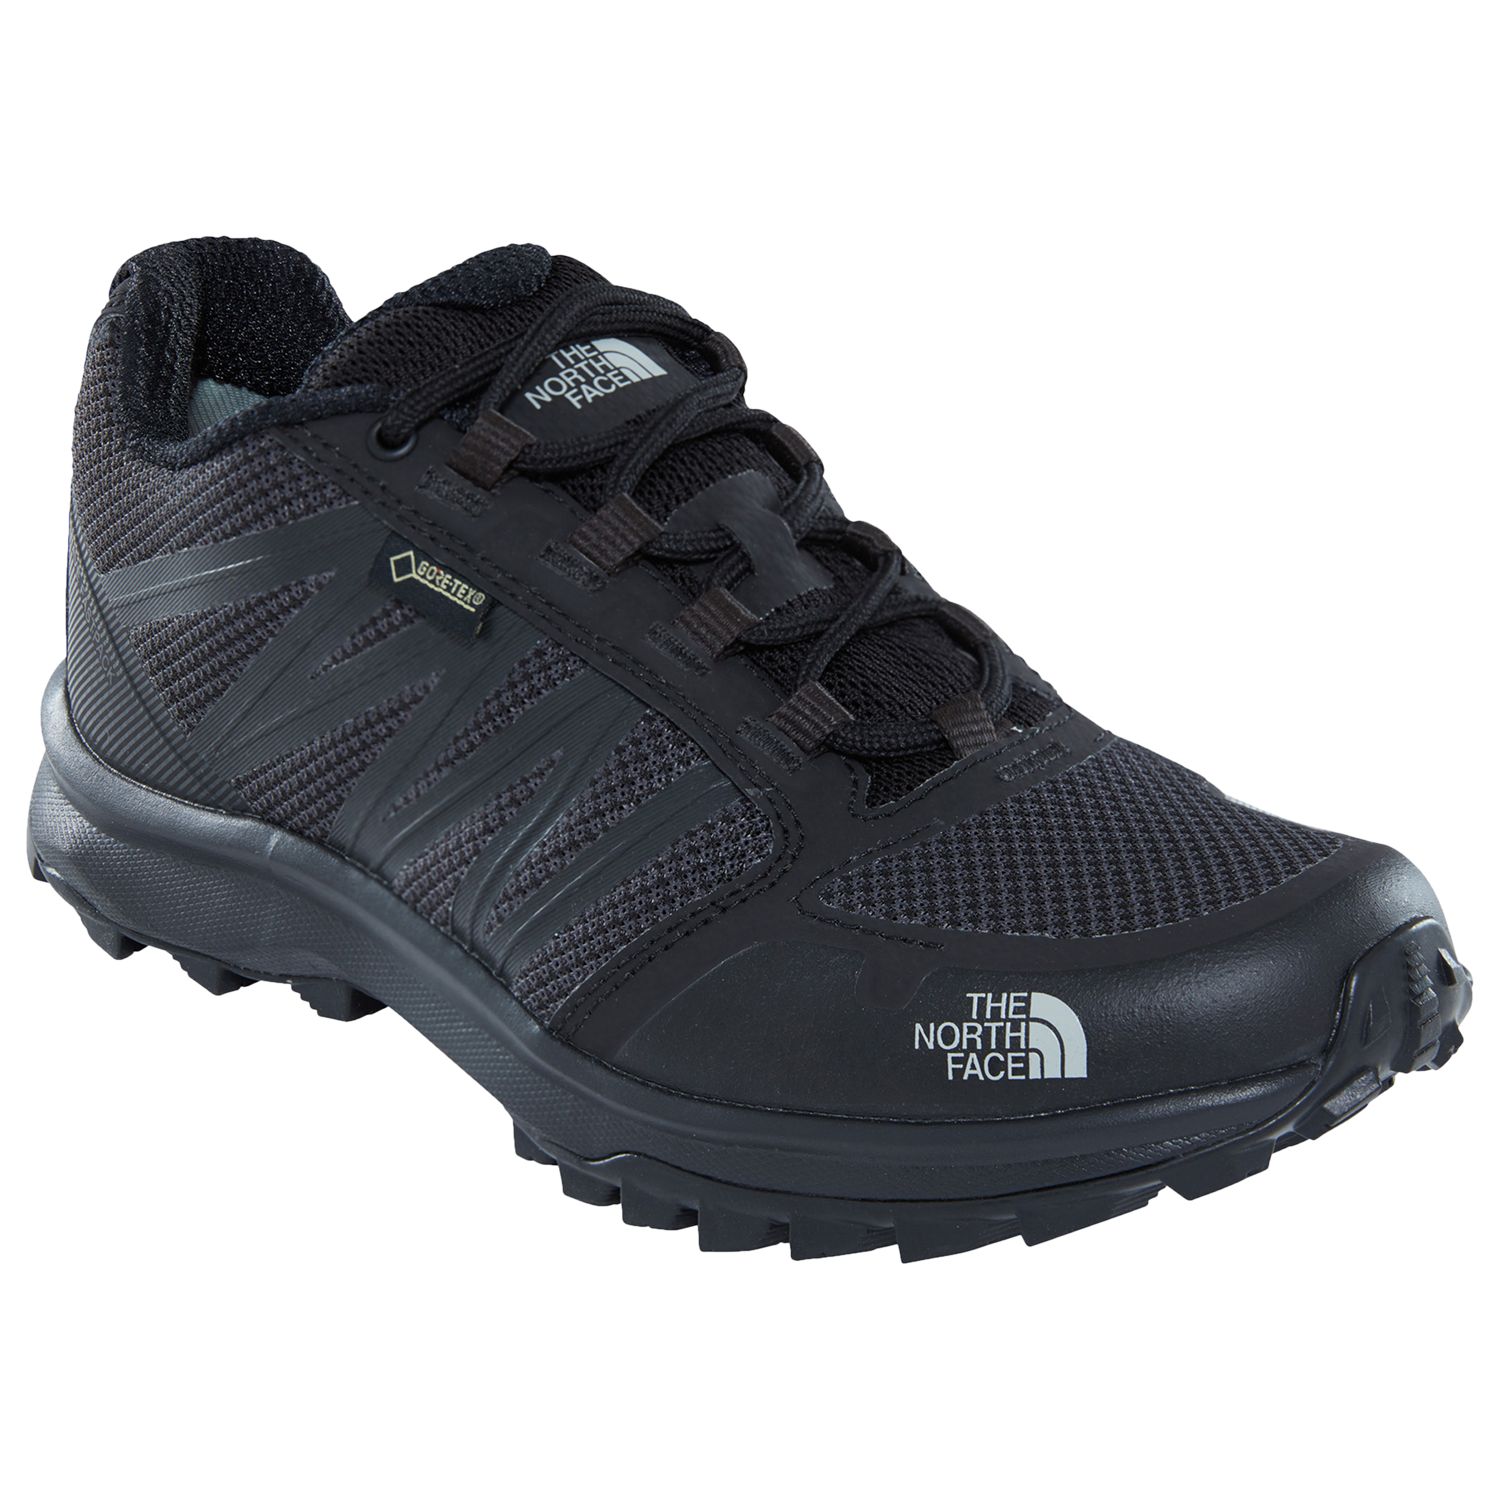 The North Face Litewave Fastpack GTX 